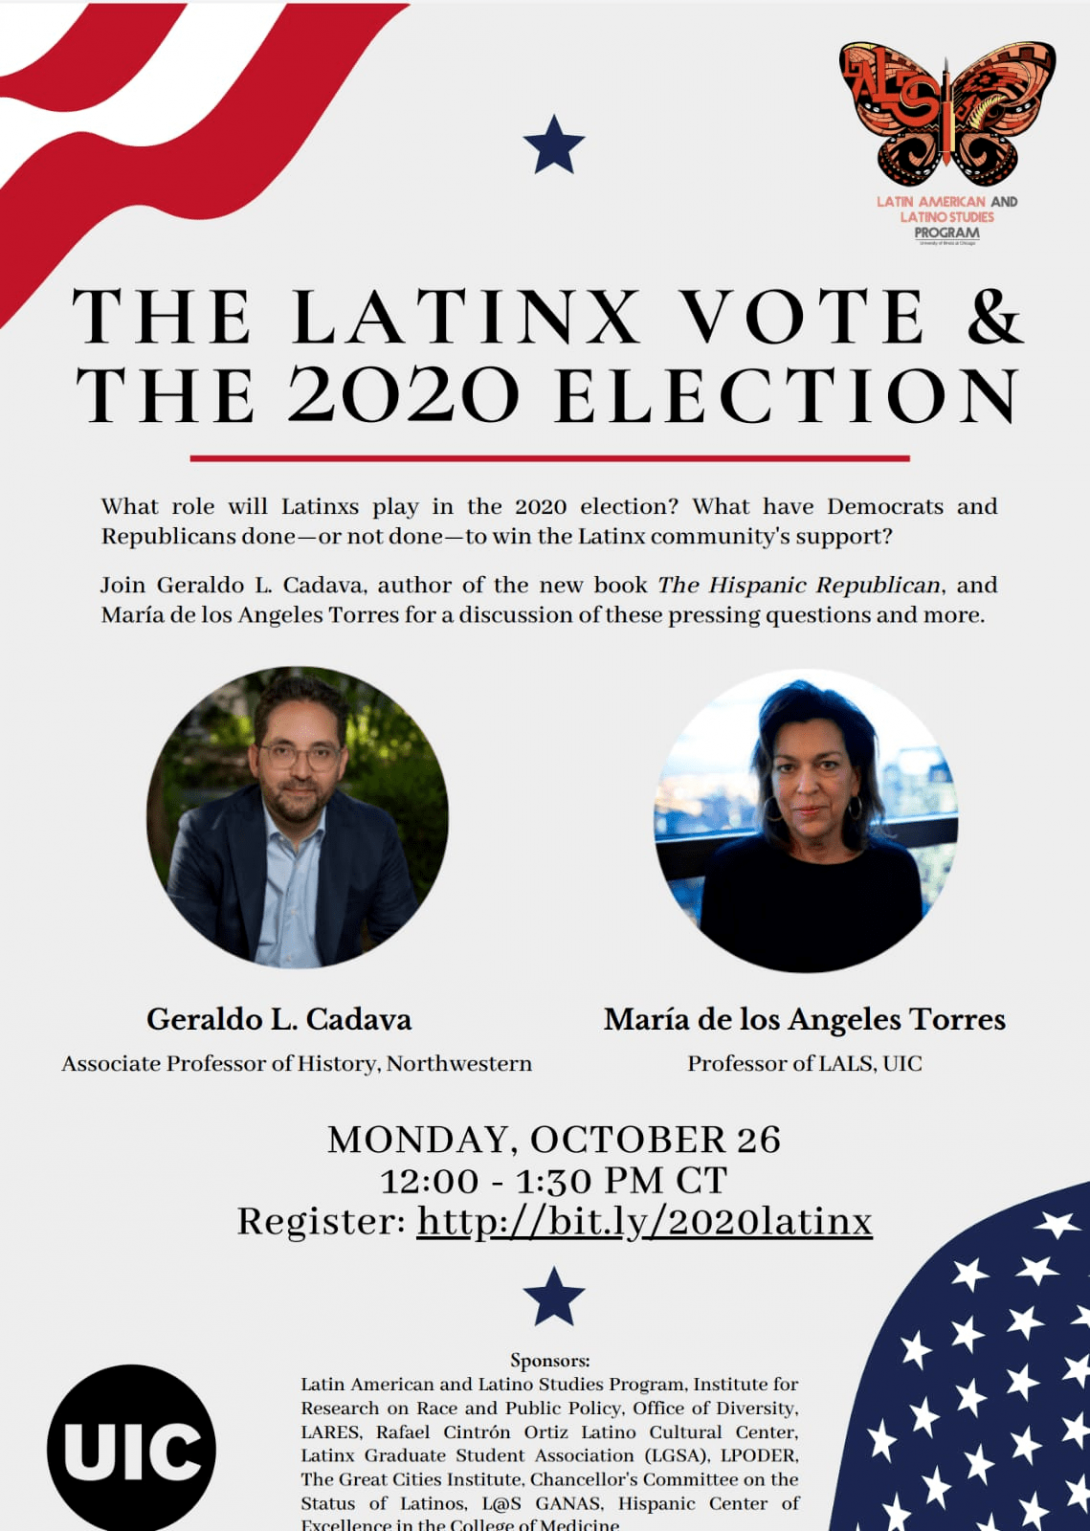 This event flyer reads: What role will Latinxs play in the 2020 election? What have Democrats and Republican done-- or not done-- to win the Latinx's community support? A headshot of Associate Professor Geraldo L Rivera provided, he is wearing a suit and smiling. A headshot of Professor Maria de Los Angeles is Provided, she also smiles. The border of the flyer is the American flag, on the right corner the Latin American and Latino Studies Monarch butterfly is  pictured. The bottom center restates the event date Monday, October 26- and event time time 12:00-1:30 pm CT.